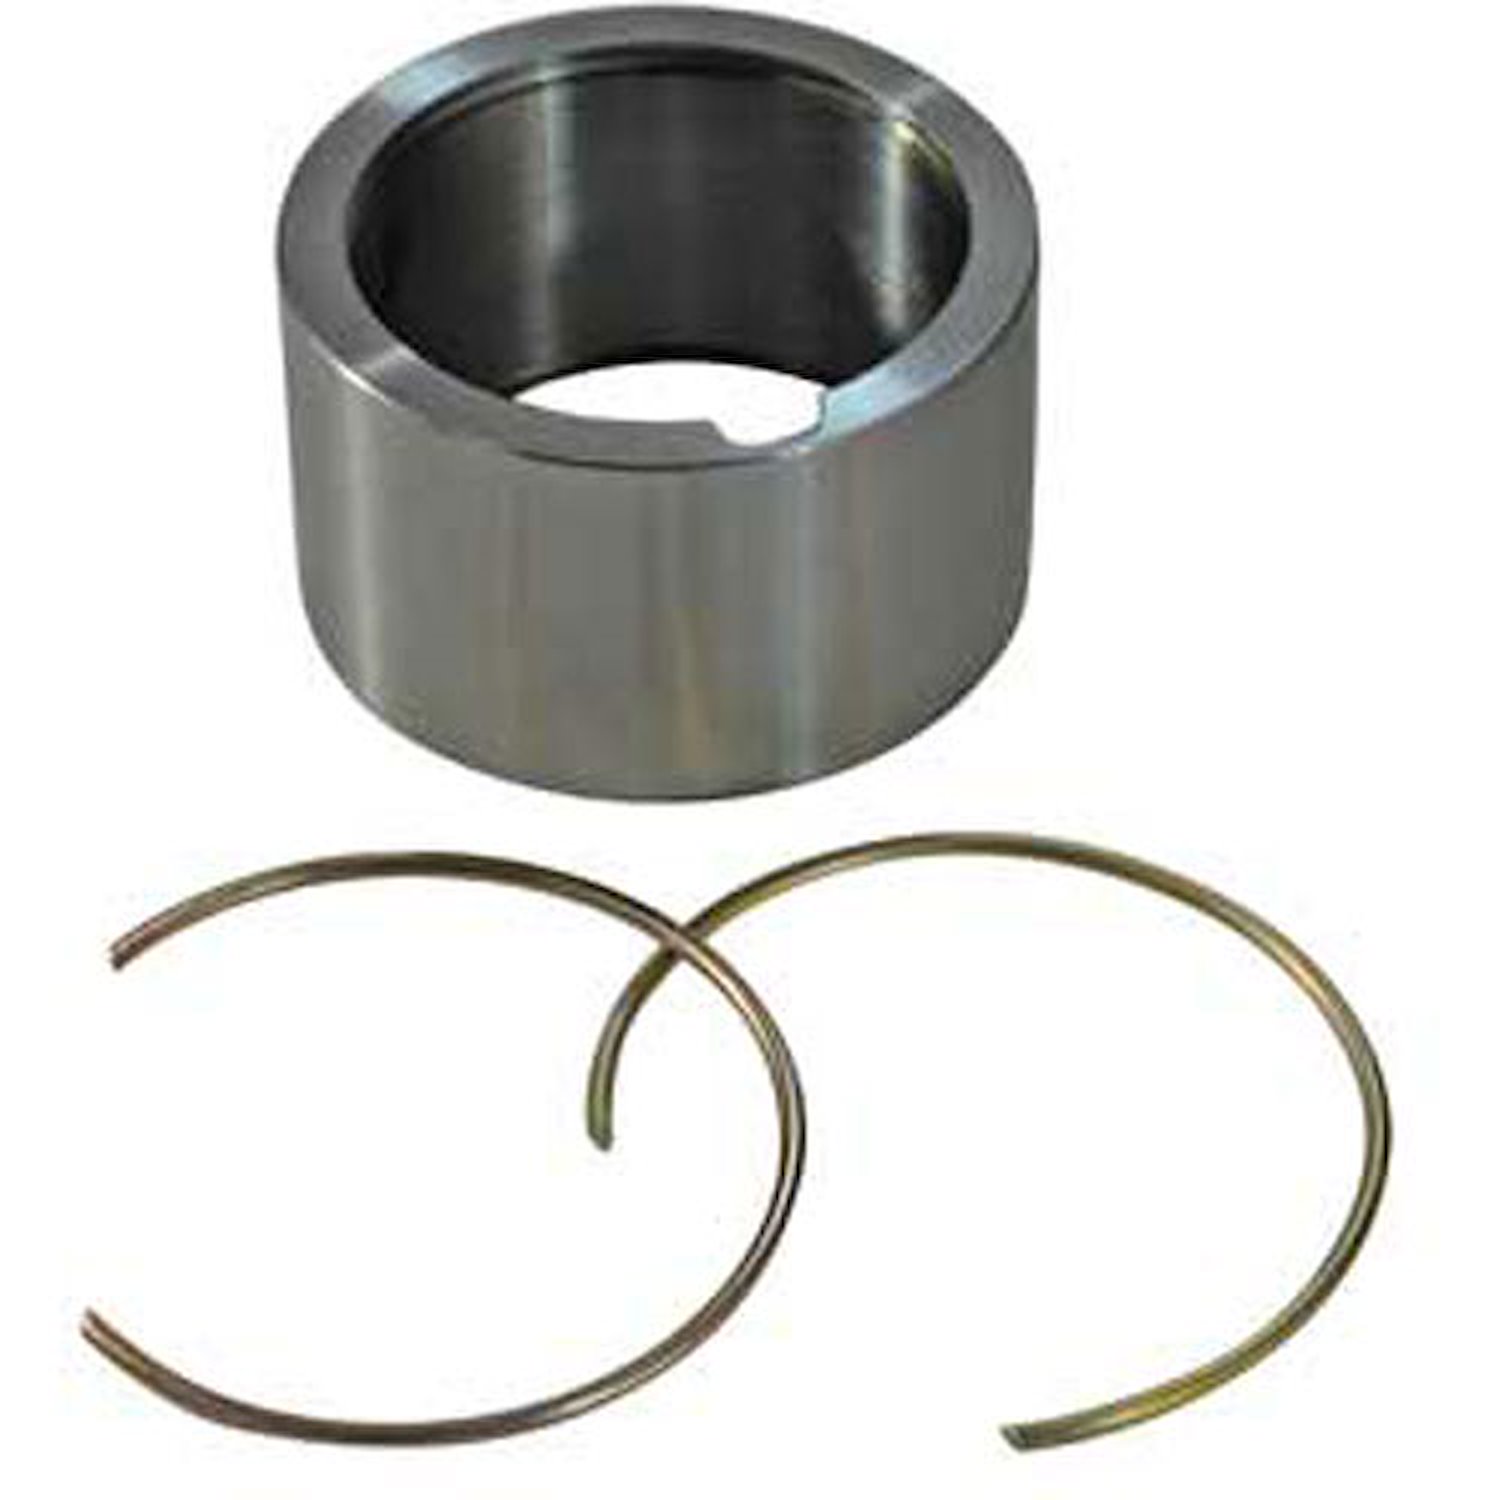 WELD-IN RING KIT 40mm ID